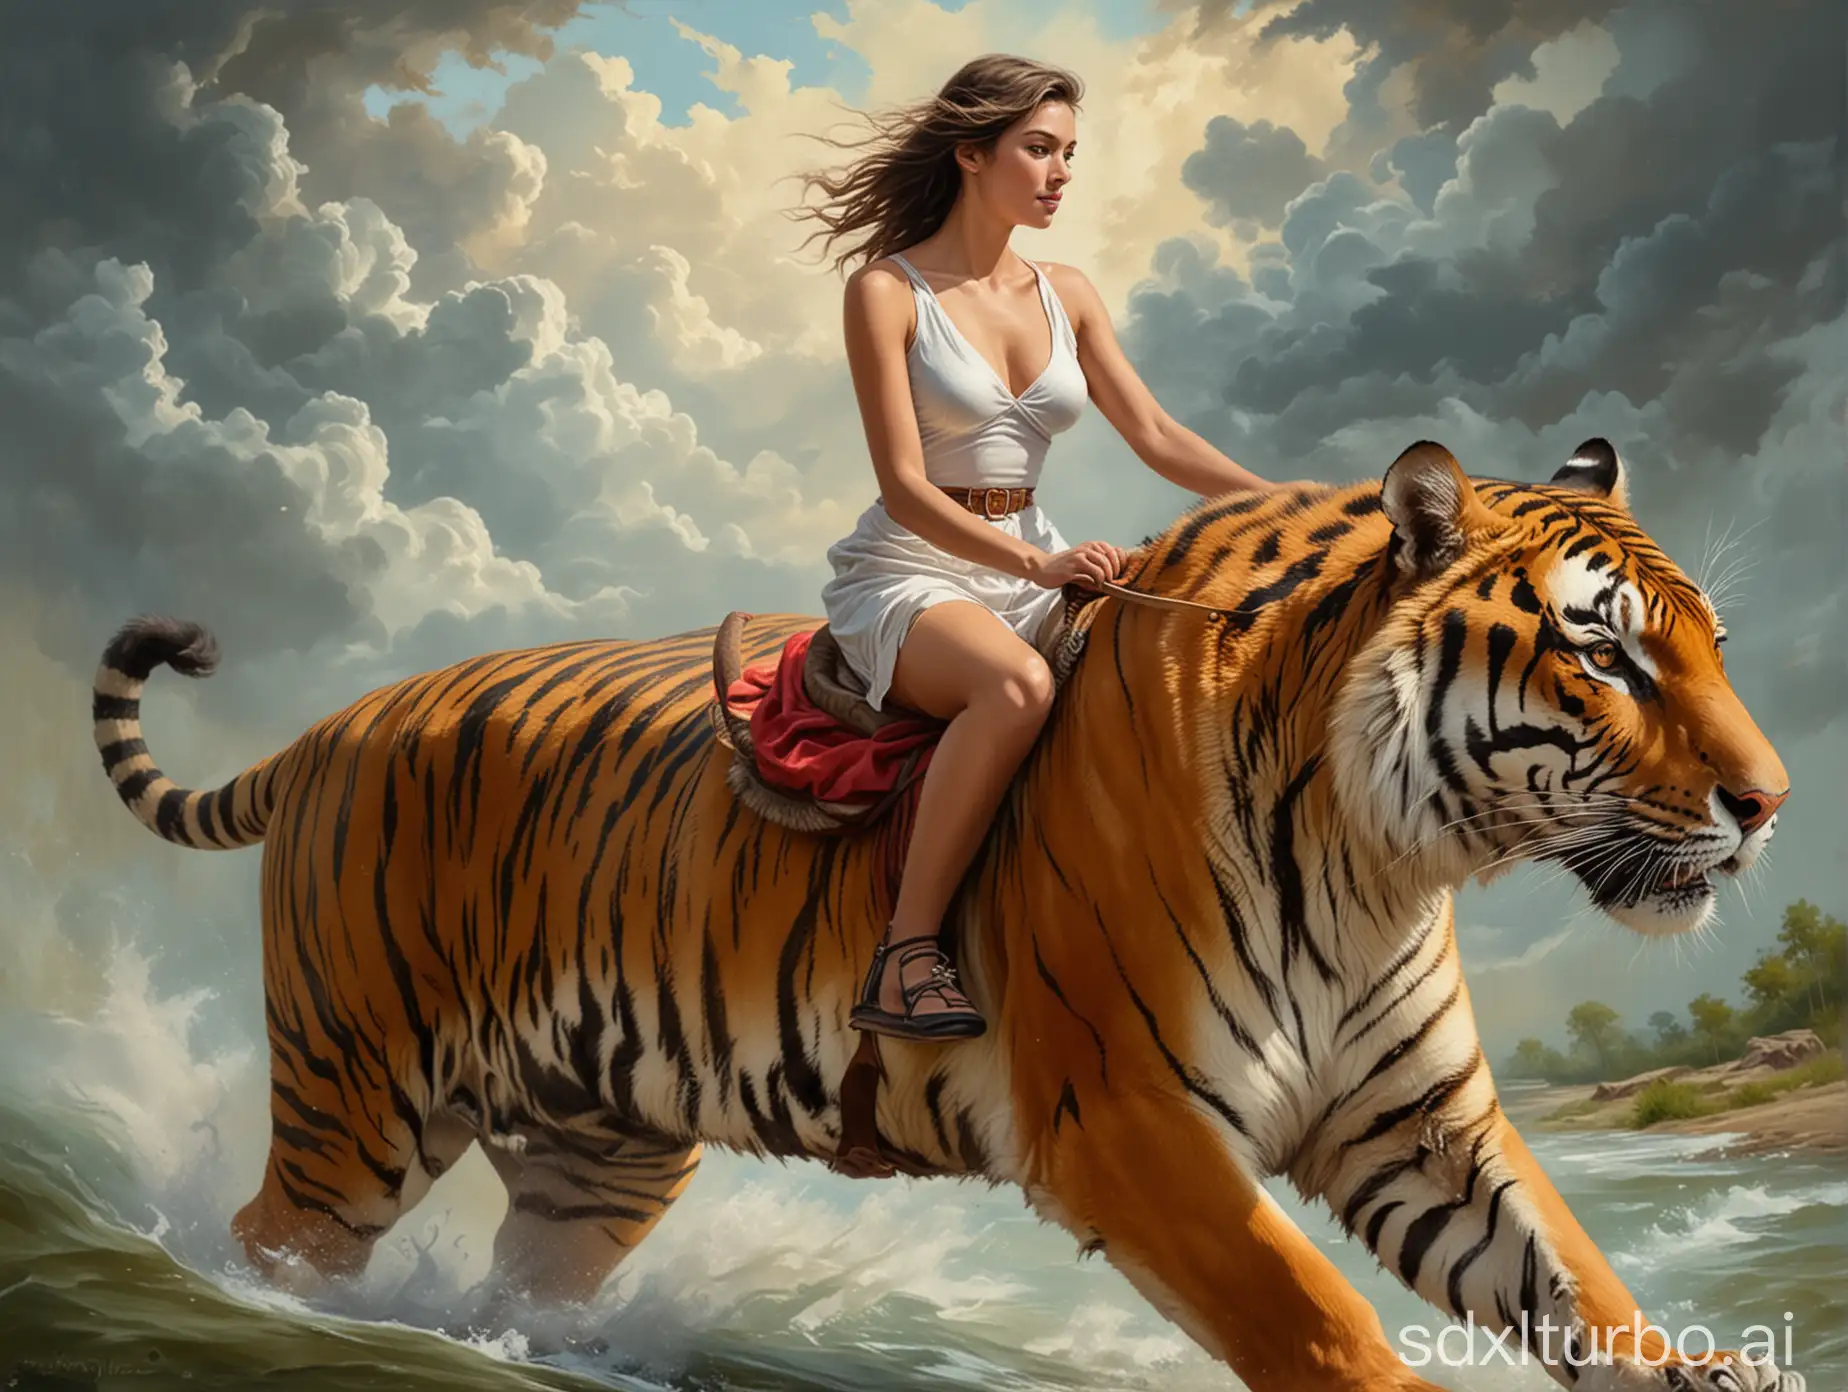 Graceful-Woman-Riding-Majestic-Tiger-in-Stunning-Oil-Painting